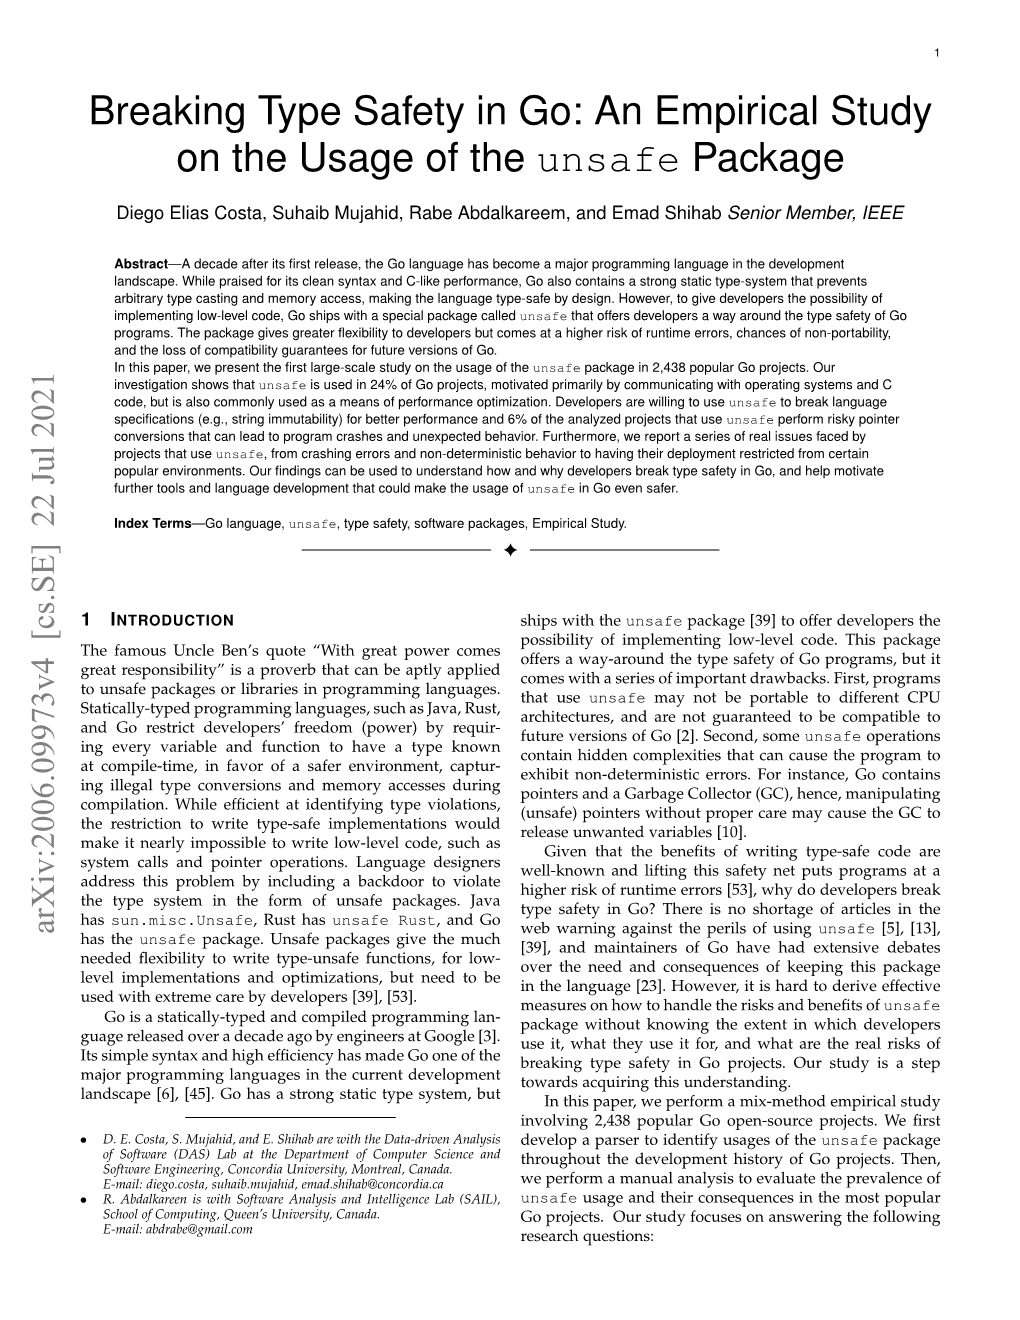 An Empirical Study on the Usage of the Unsafe Package